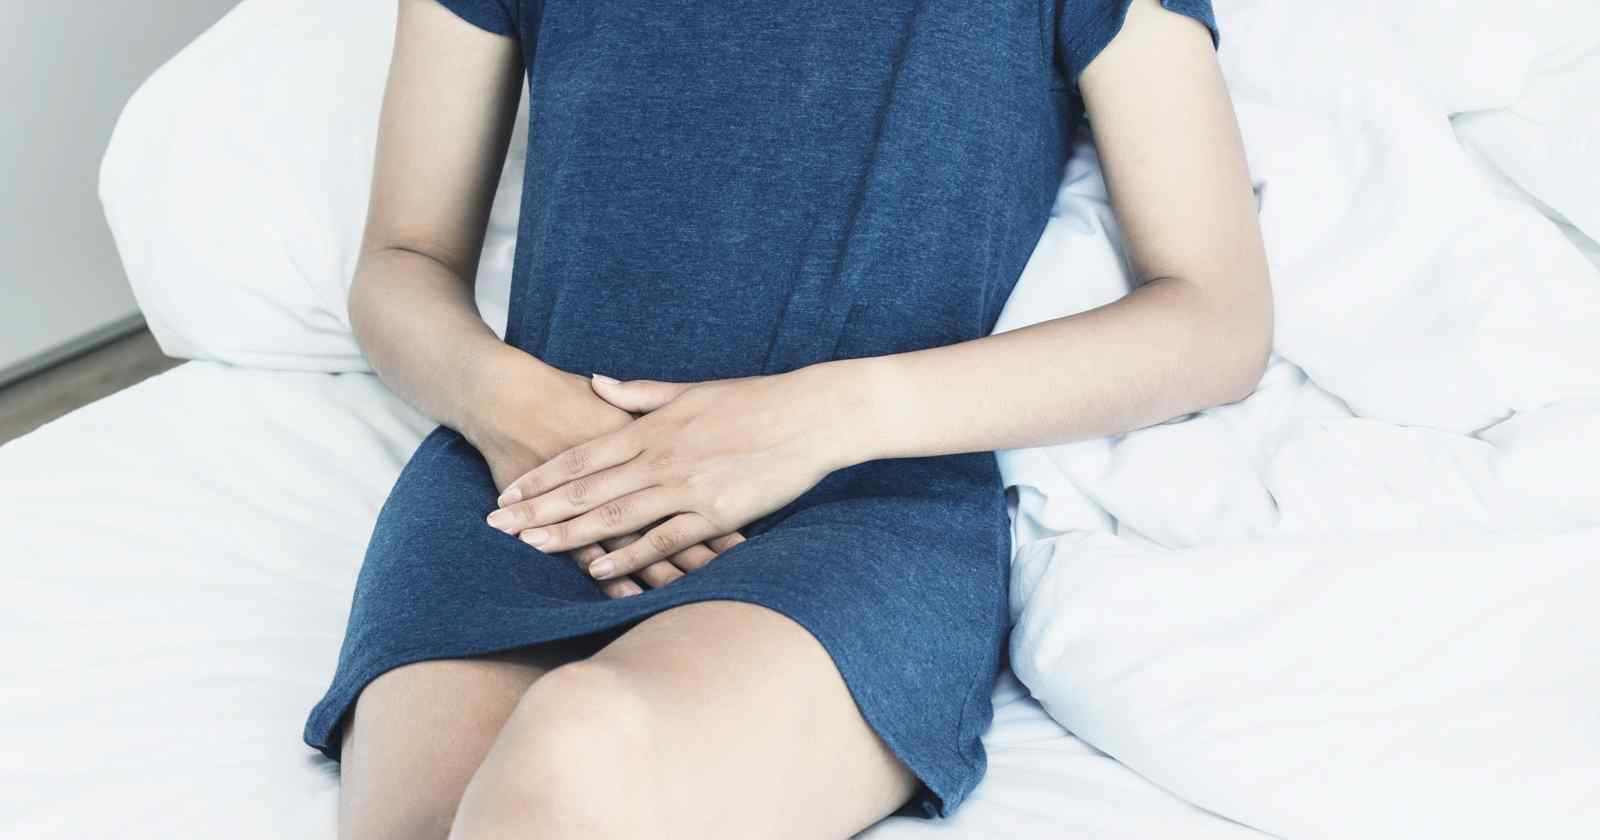 Implantation Bleeding: All you need to know - Clearblue